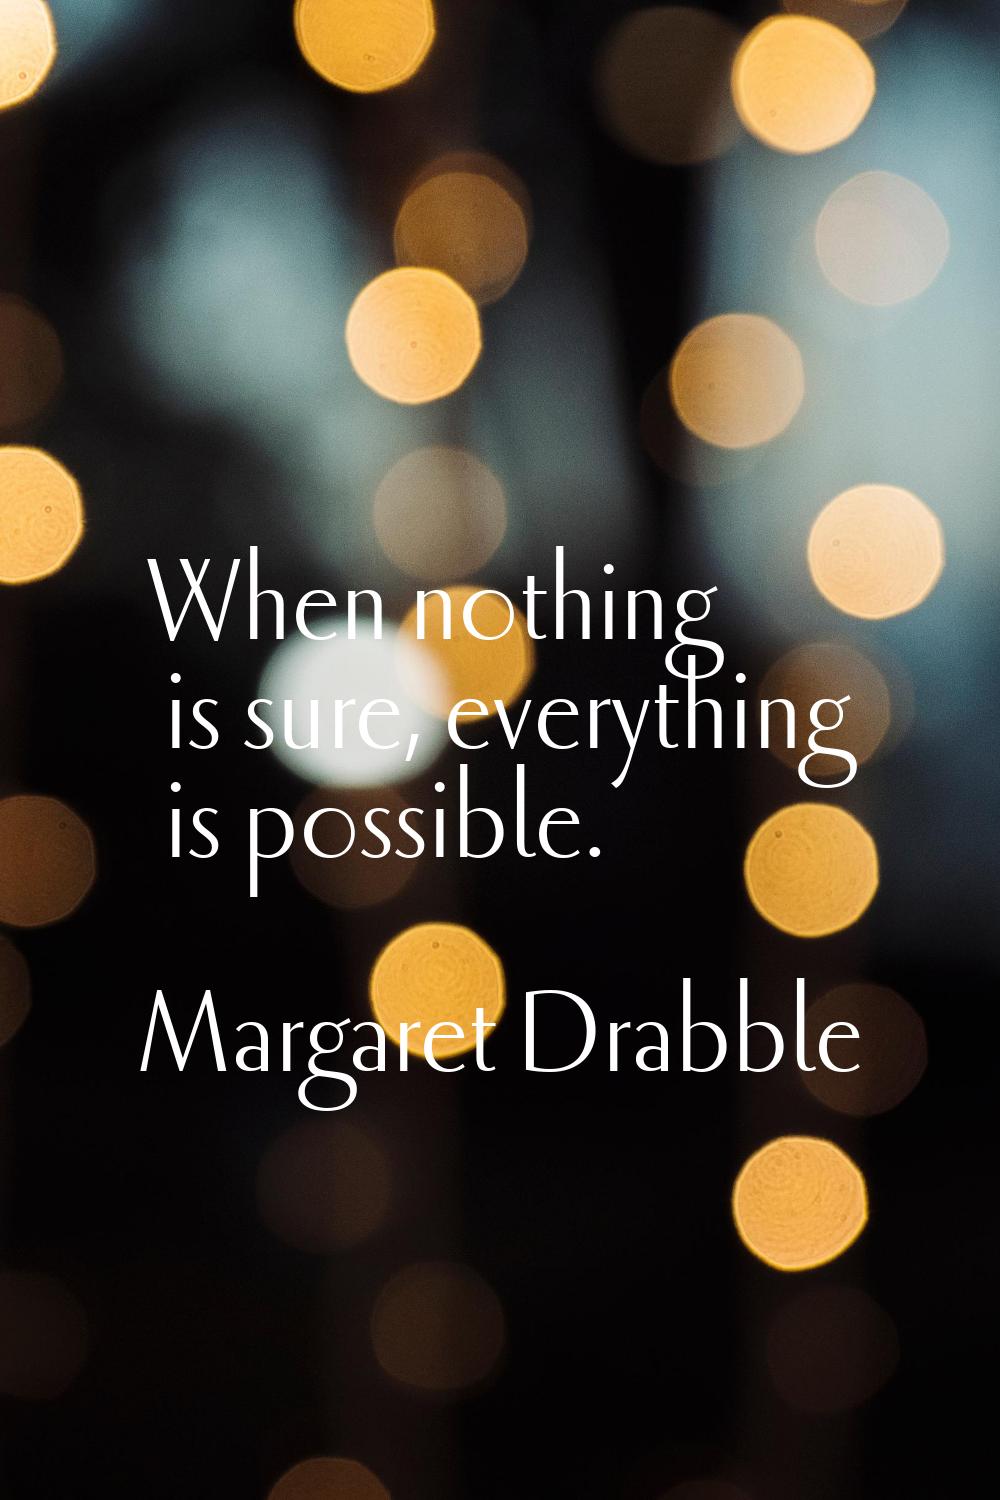 When nothing is sure, everything is possible.